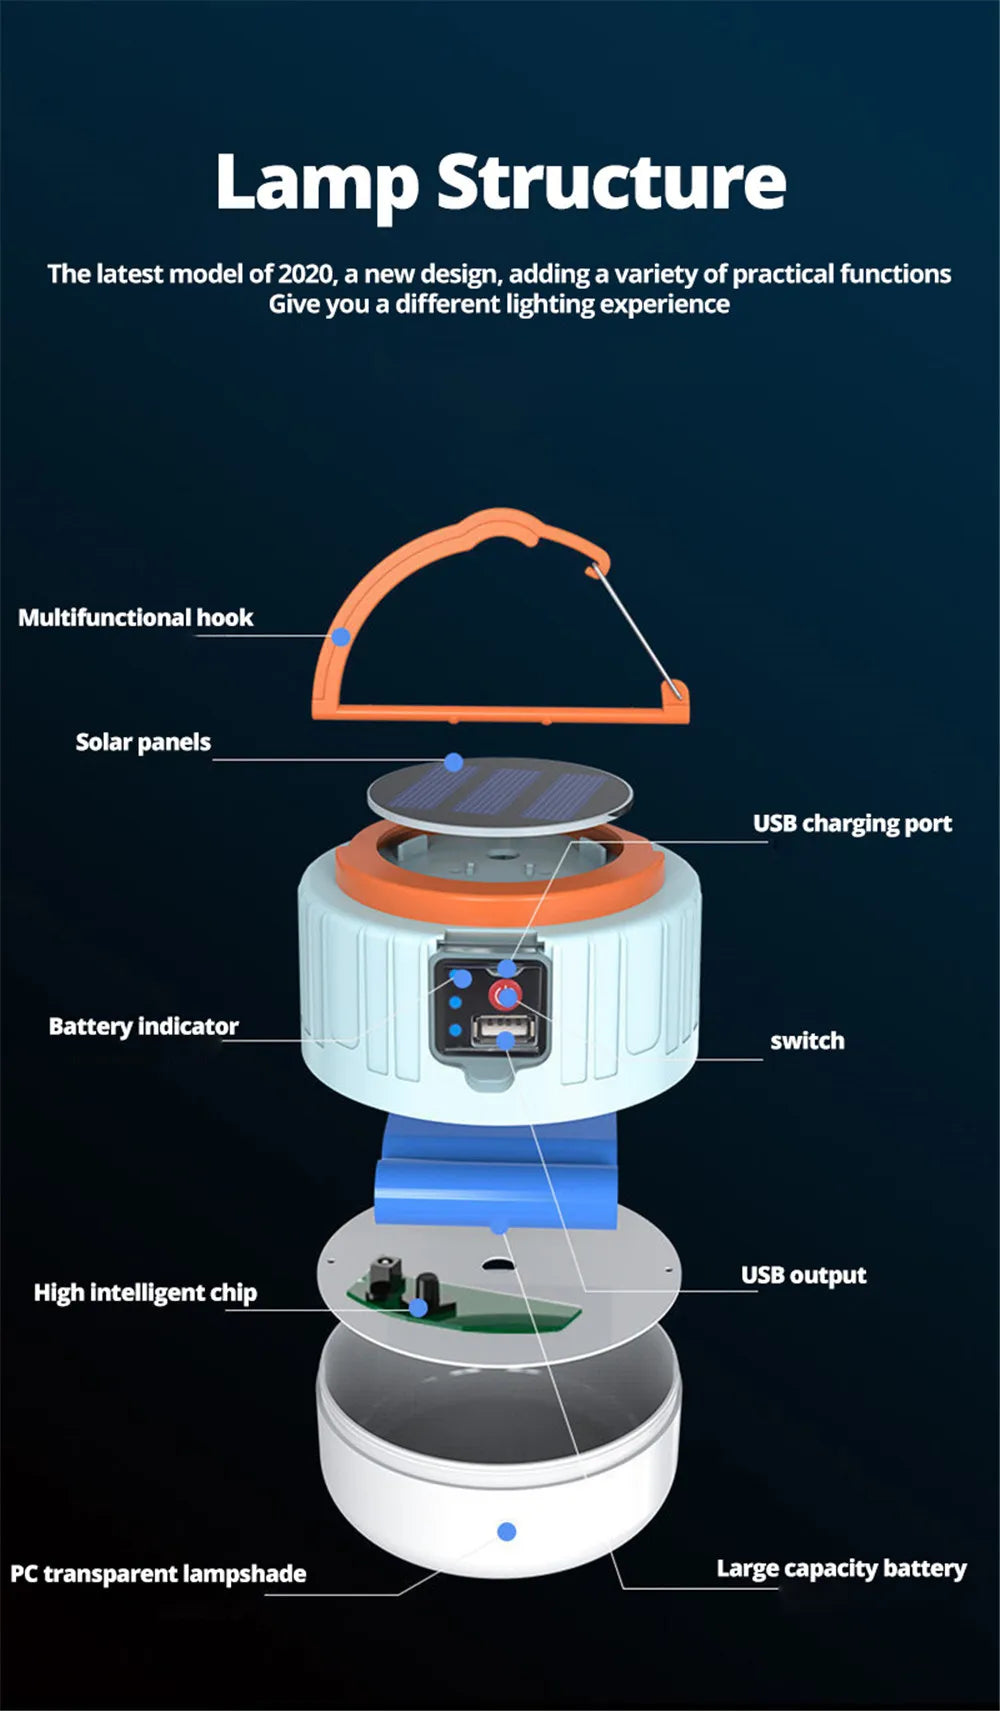 High Power Solar LED Camping Light, High-tech lantern with solar charging, USB output, and battery indicator for unique lighting experience.